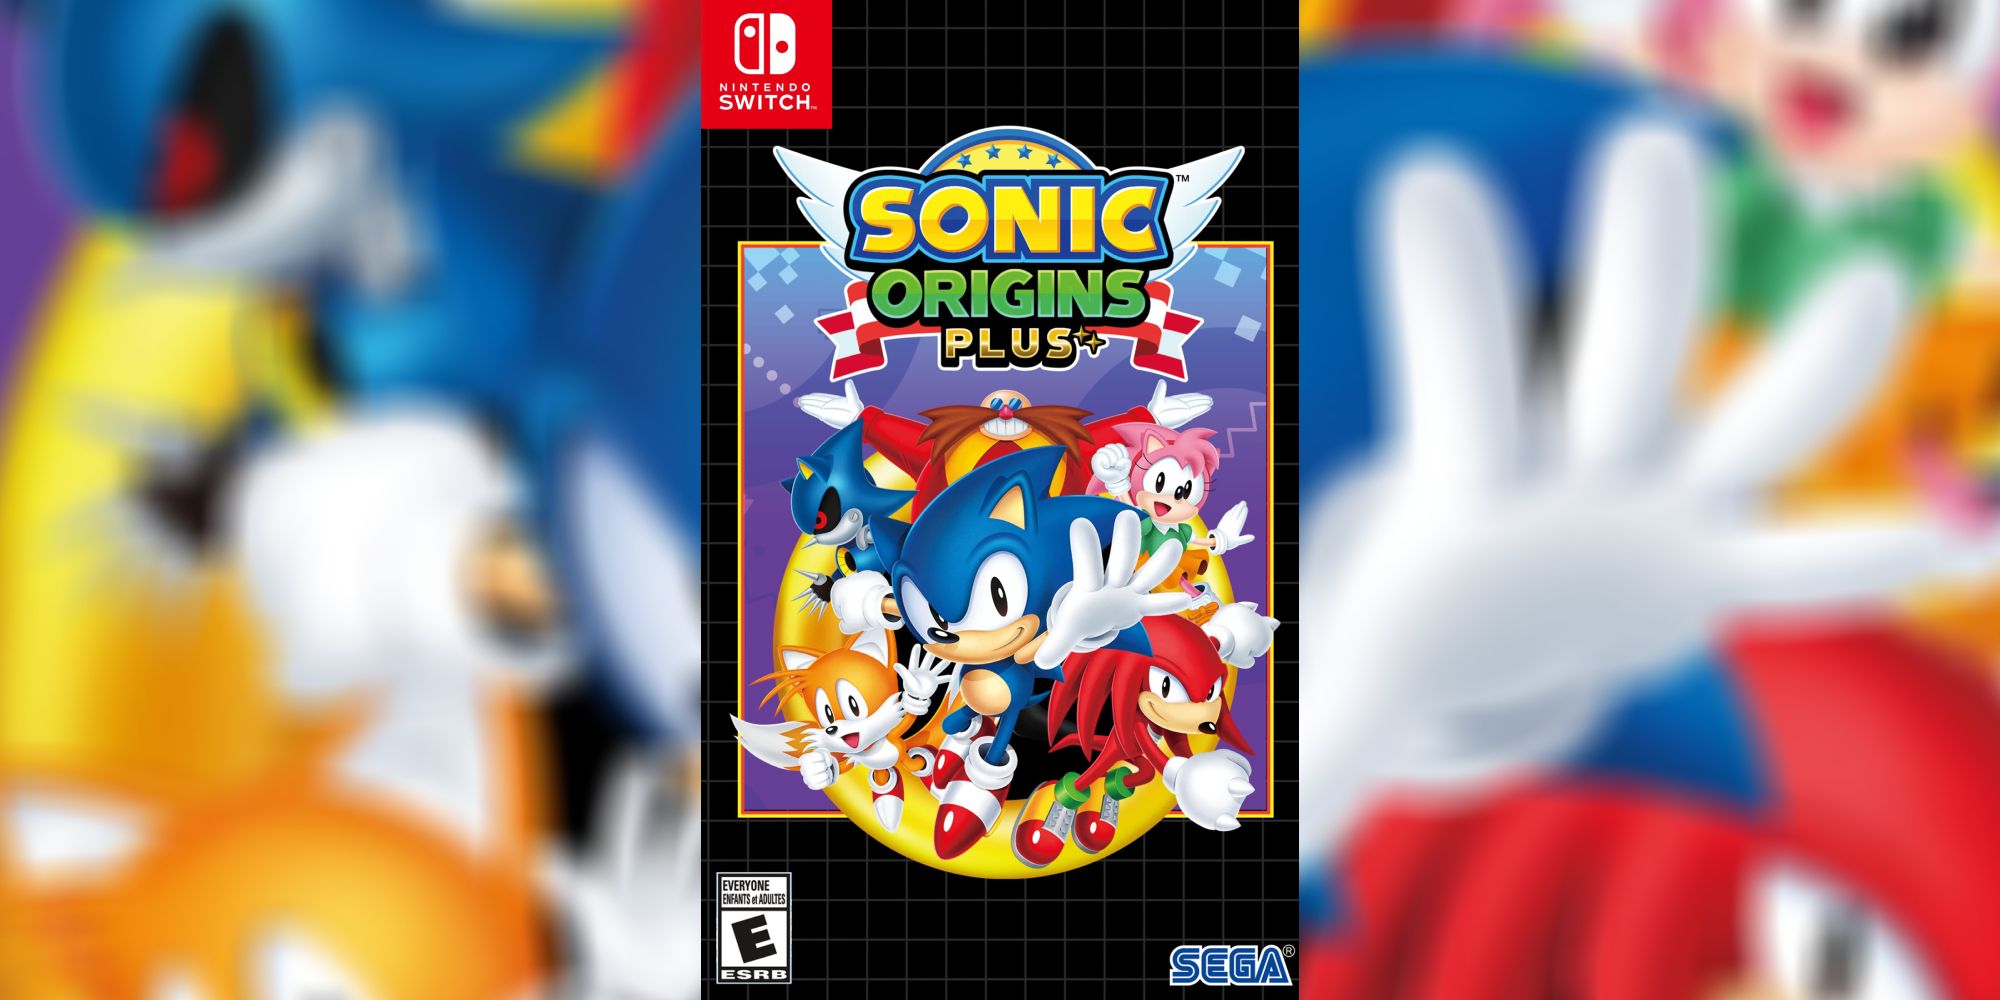 Sonic, Tails, Amy, Knuckles, Metal Sonic, and Dr. Eggman on the cover of Sonic Origins Plus